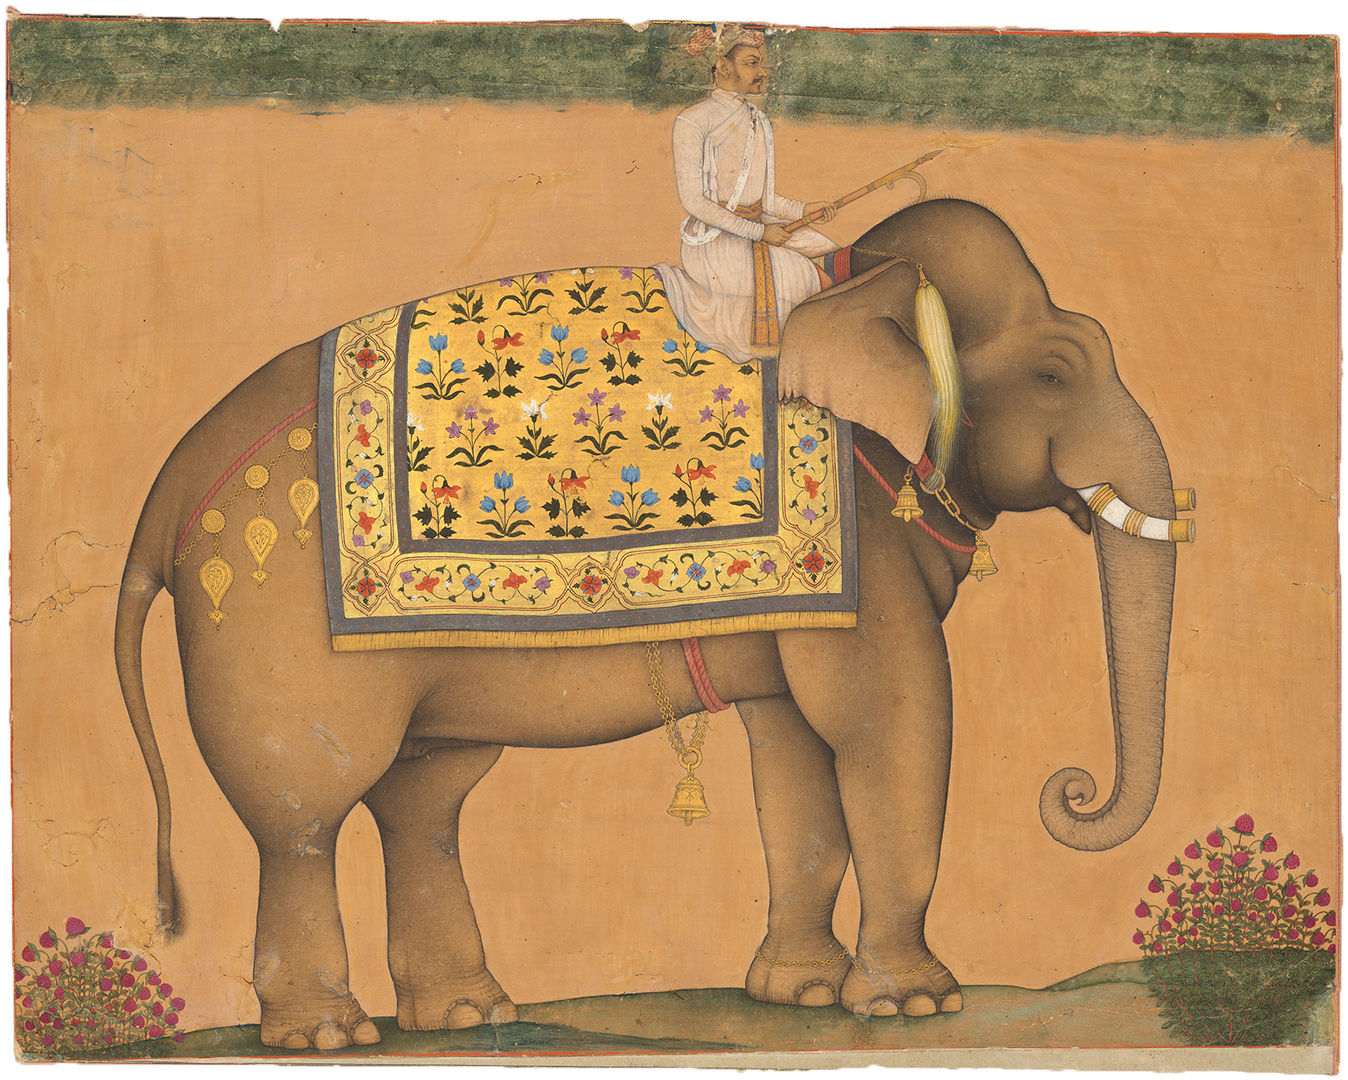 Traditional Indian painting of an elephant standing in profile with a yellow decorated clothe and a rider wearing white. Yellow background.